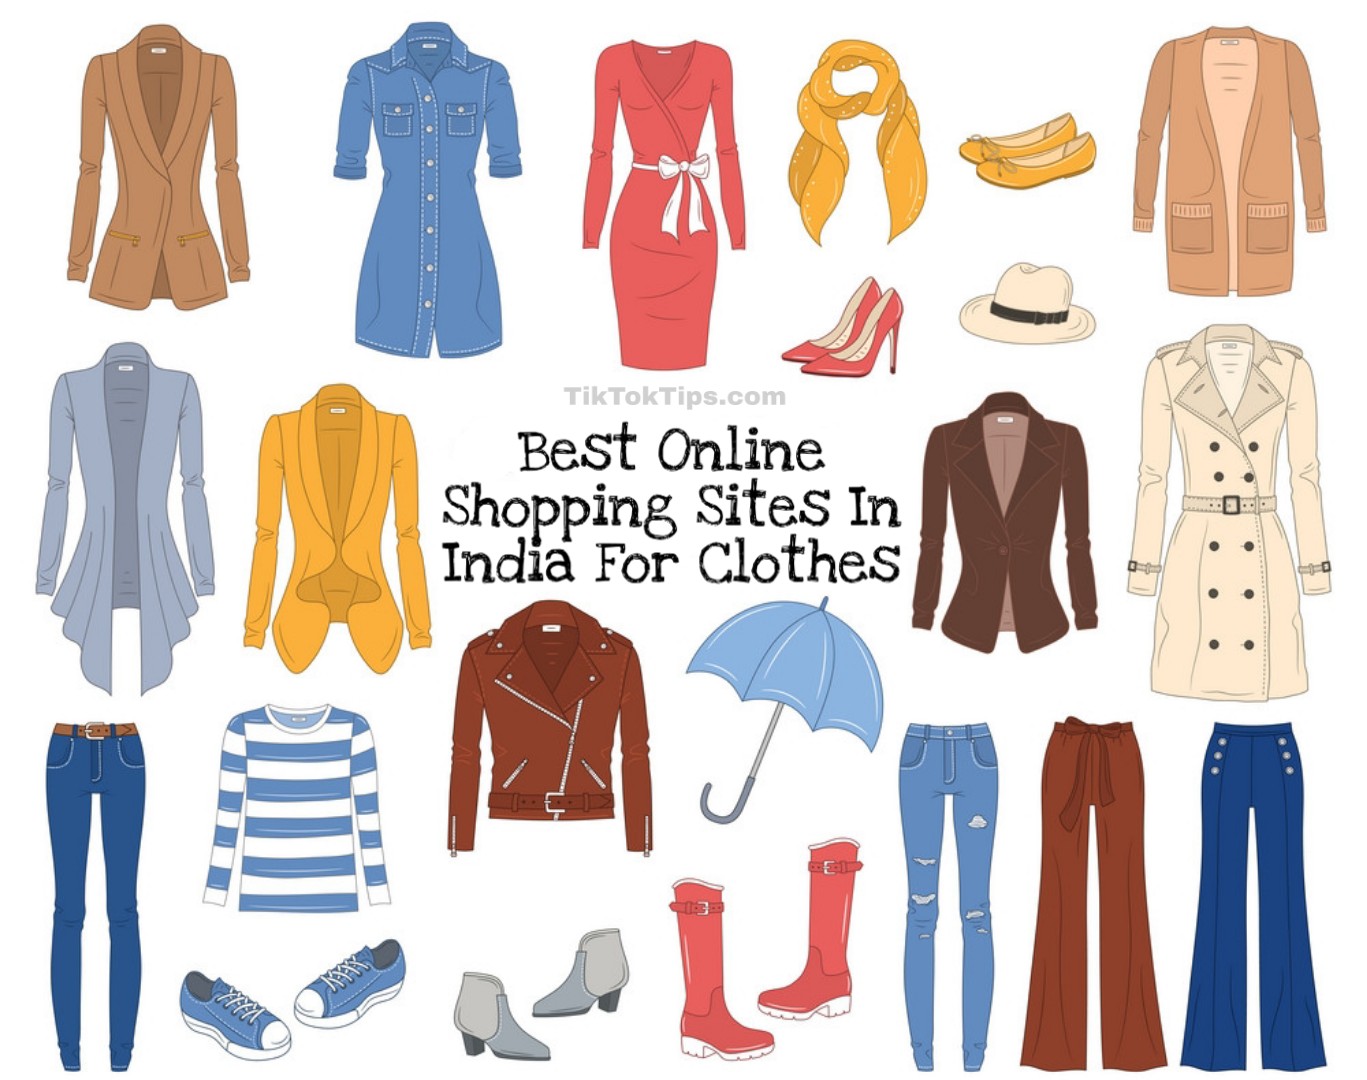 Top 25 Best Online Shopping Sites in India for Clothes ...